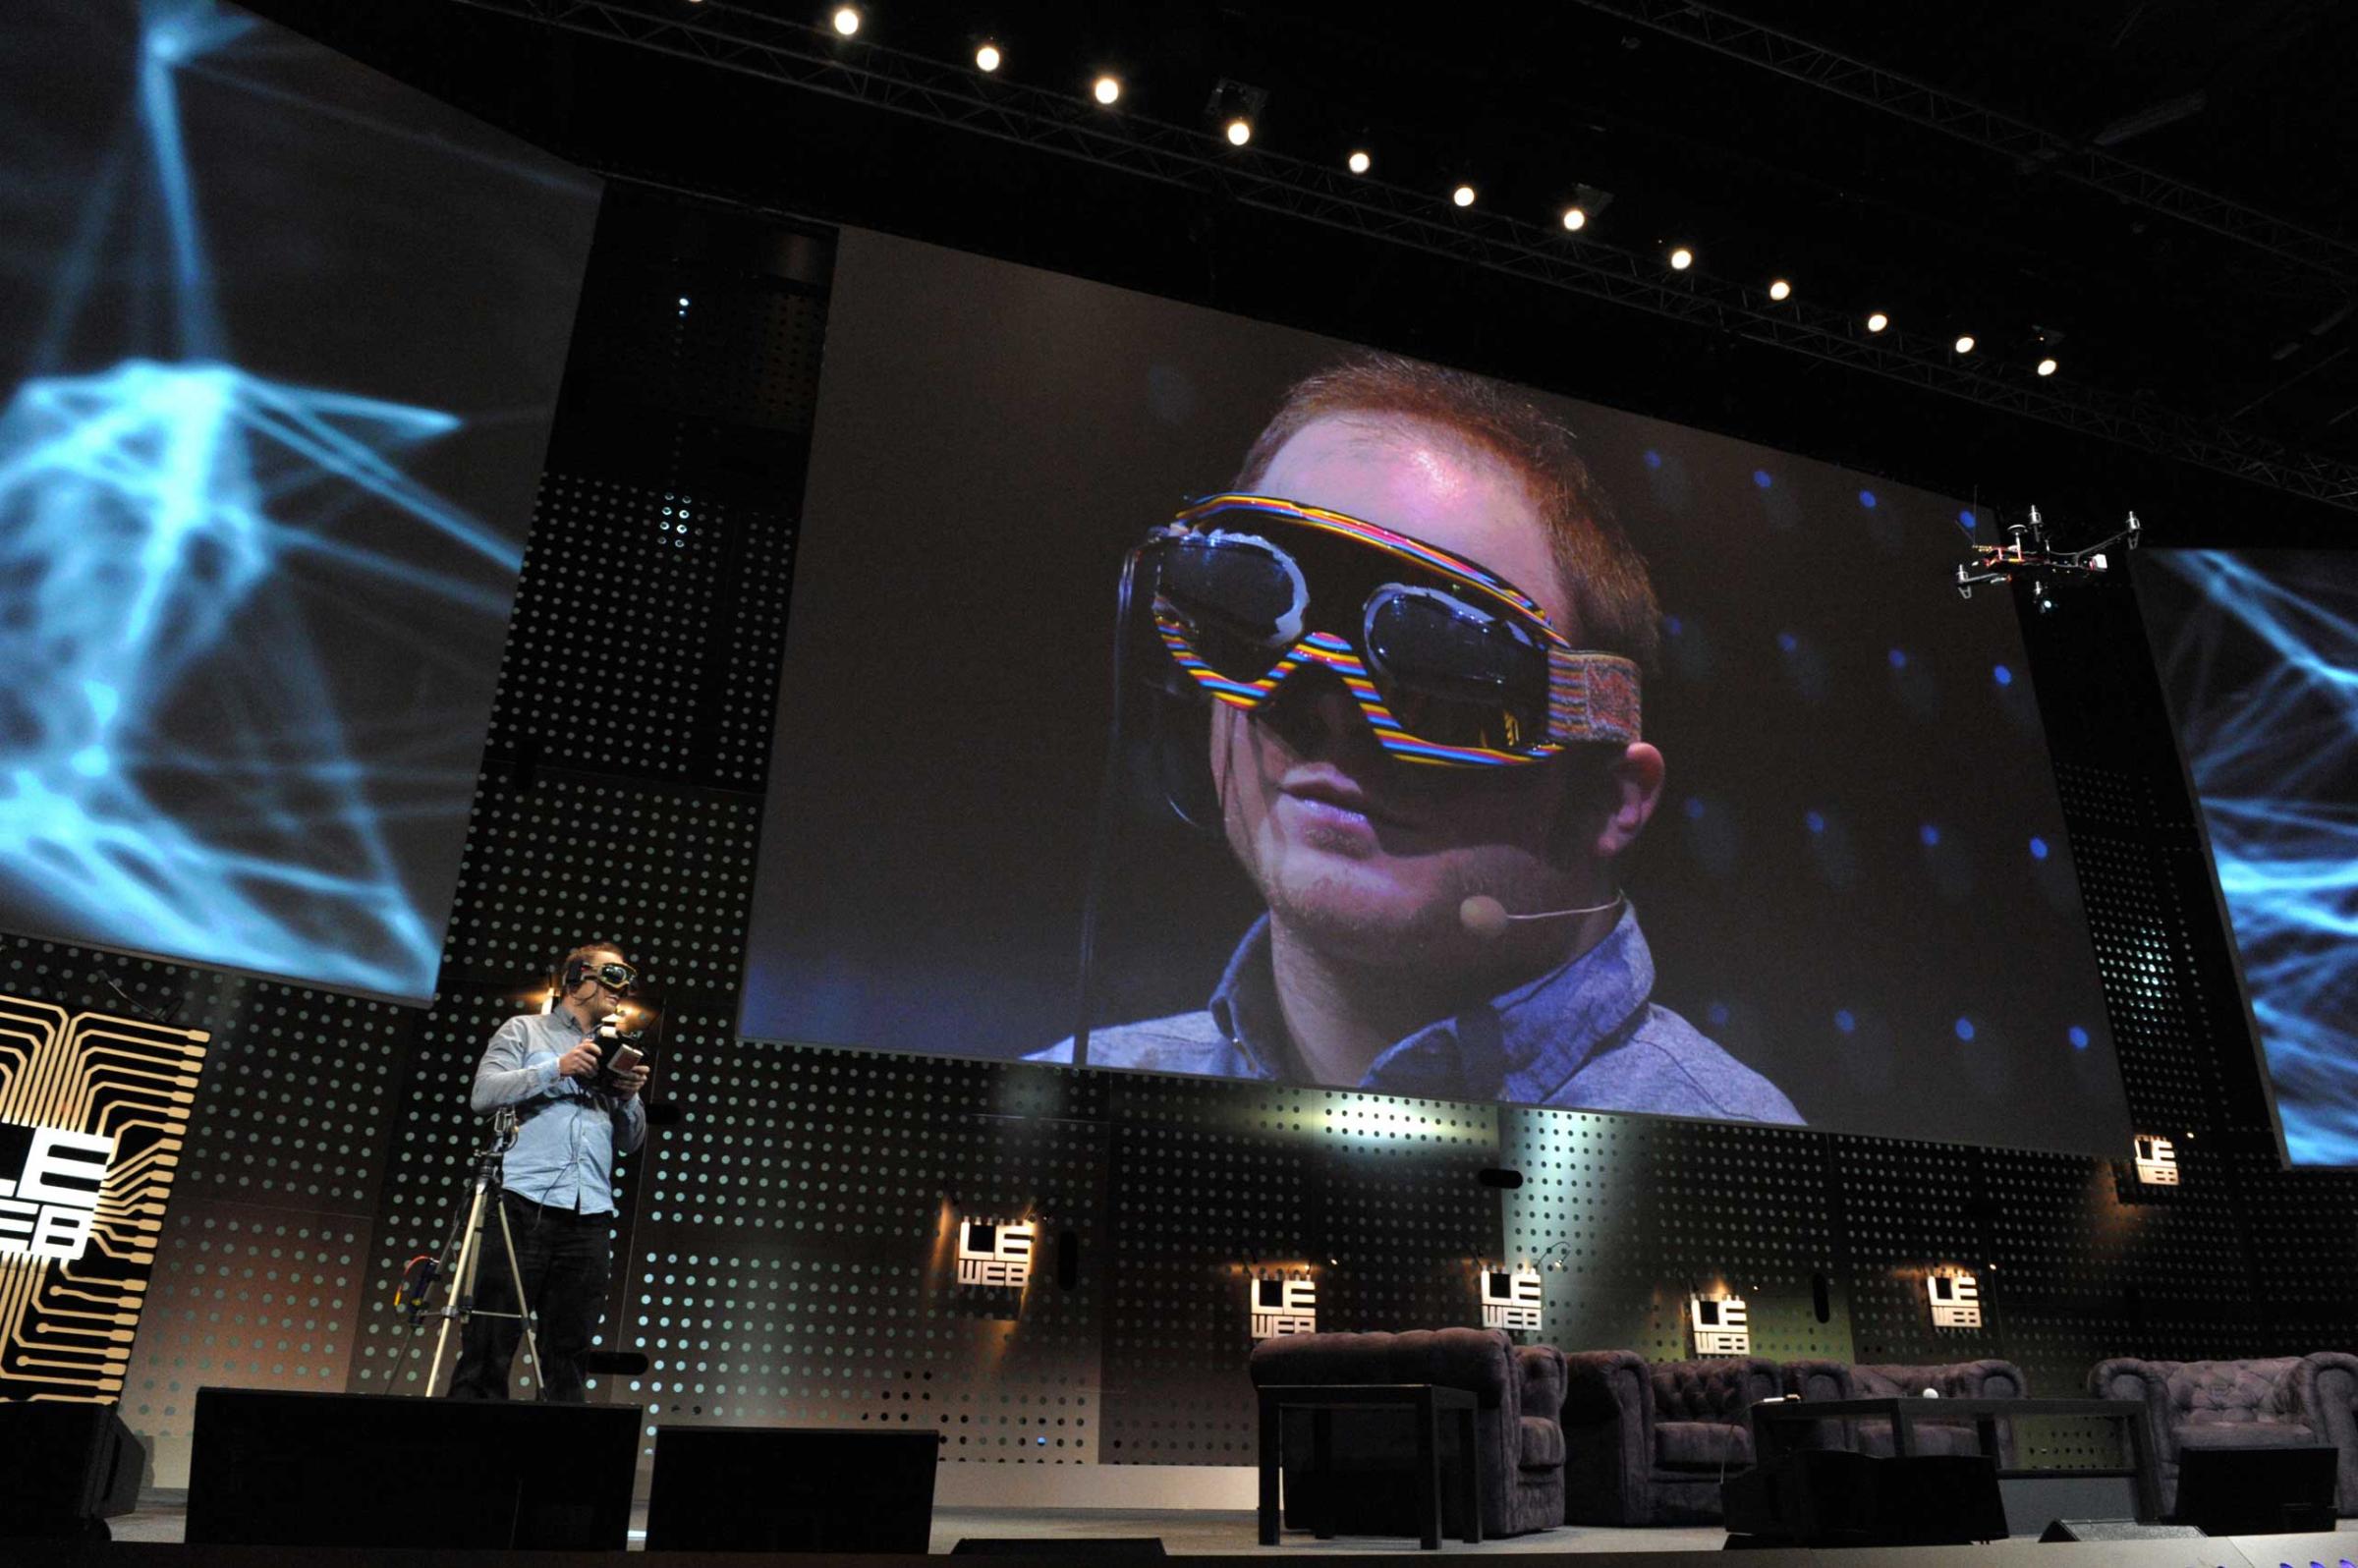 Raphael Pirker from Switzerland, founder of Team BlackSheep used virtual reality goggles to simulate the sensation of flight in the real world during a demonstration, flying from the perspective of a model aircraft, during a session of LeWeb'12 in Saint-Denis, near Paris.